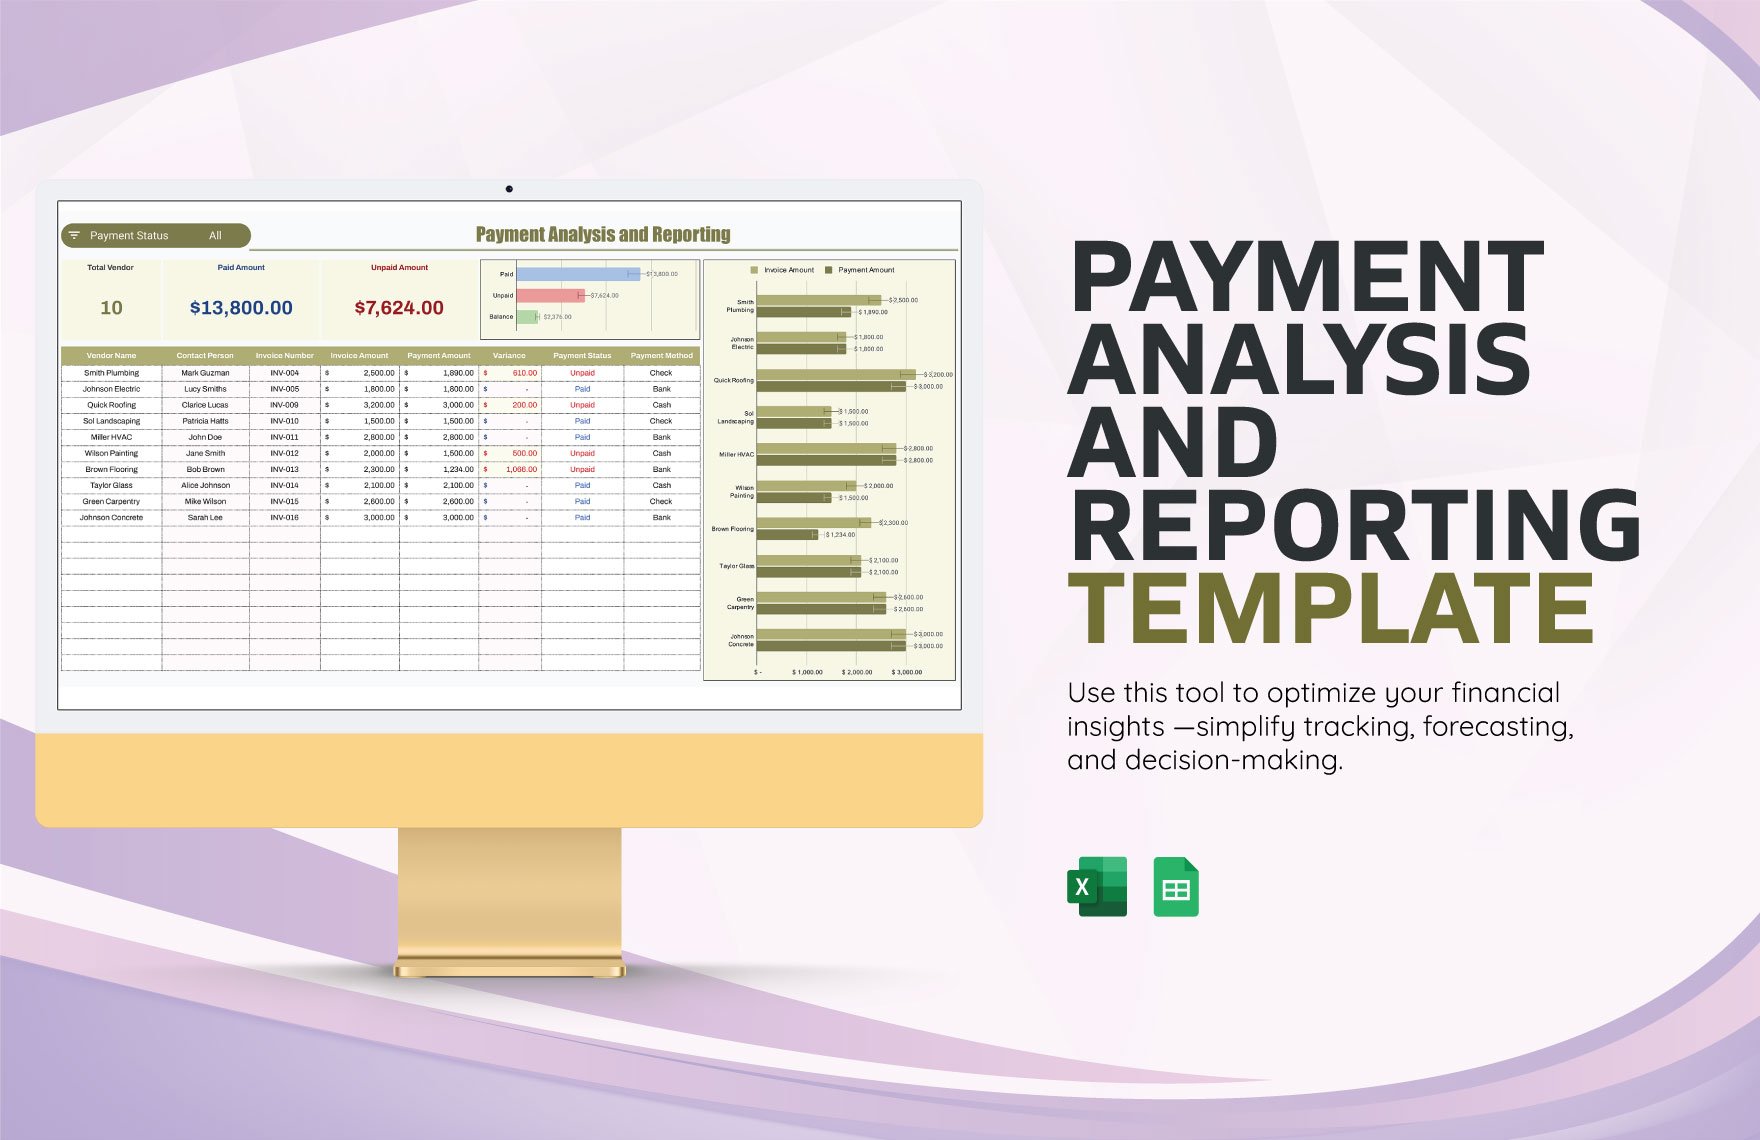 Payment Analysis and Reporting Template